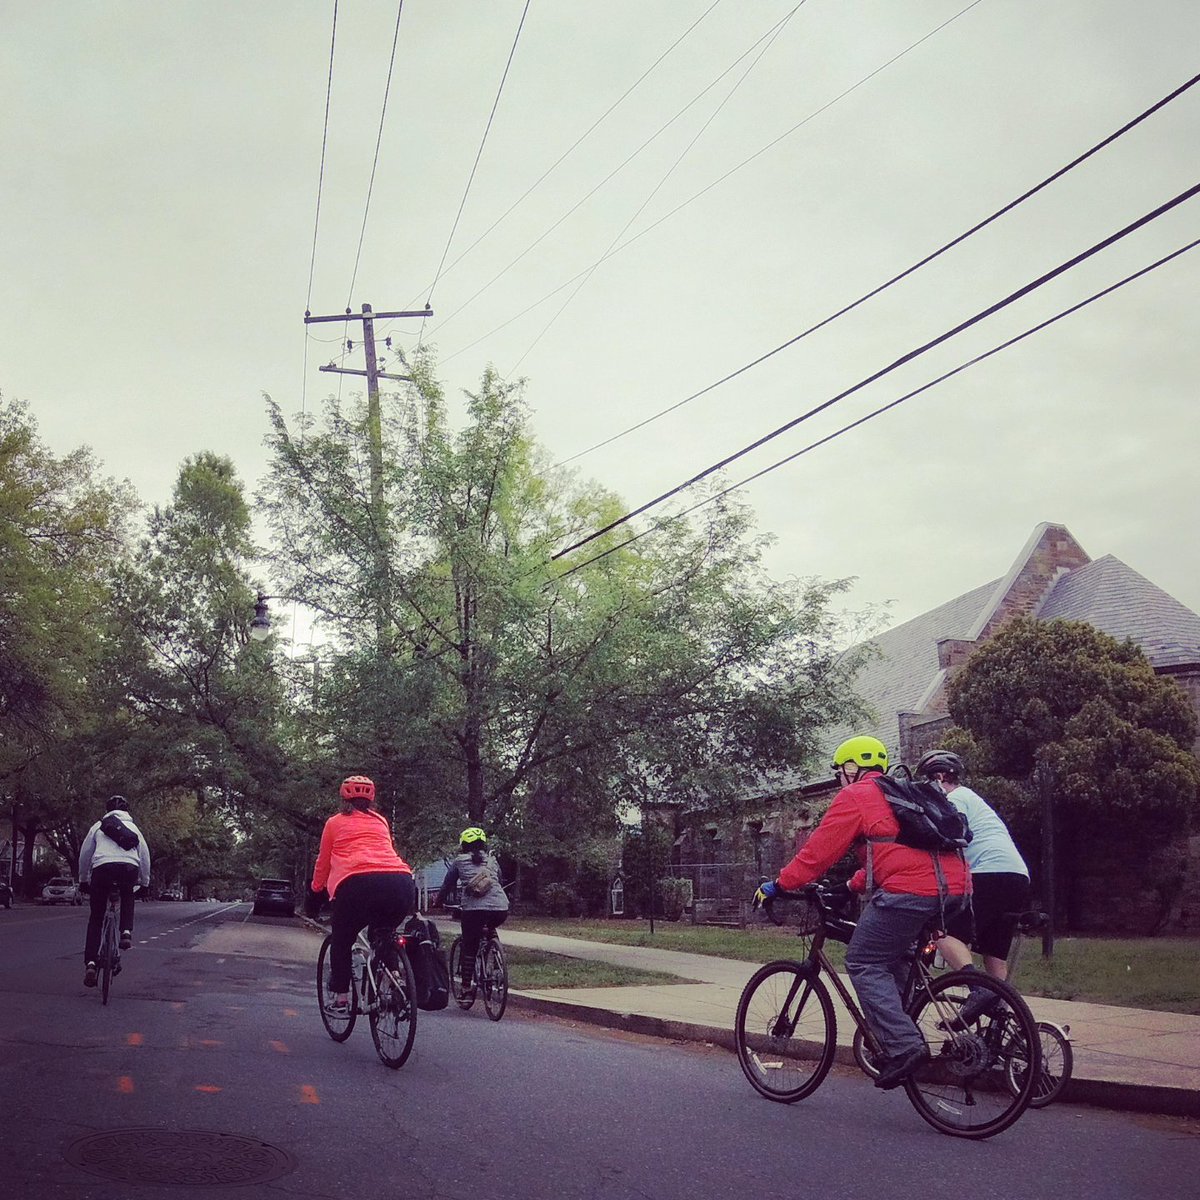 What's Going On! How about an Urban Adventure Bicycle Ride today that took us along the Marvin Gaye Trail in Northeast DC! #bikedc #urbanadventureride #uabicycleride #cycling #bicycleride #washingtondc #marvingaye